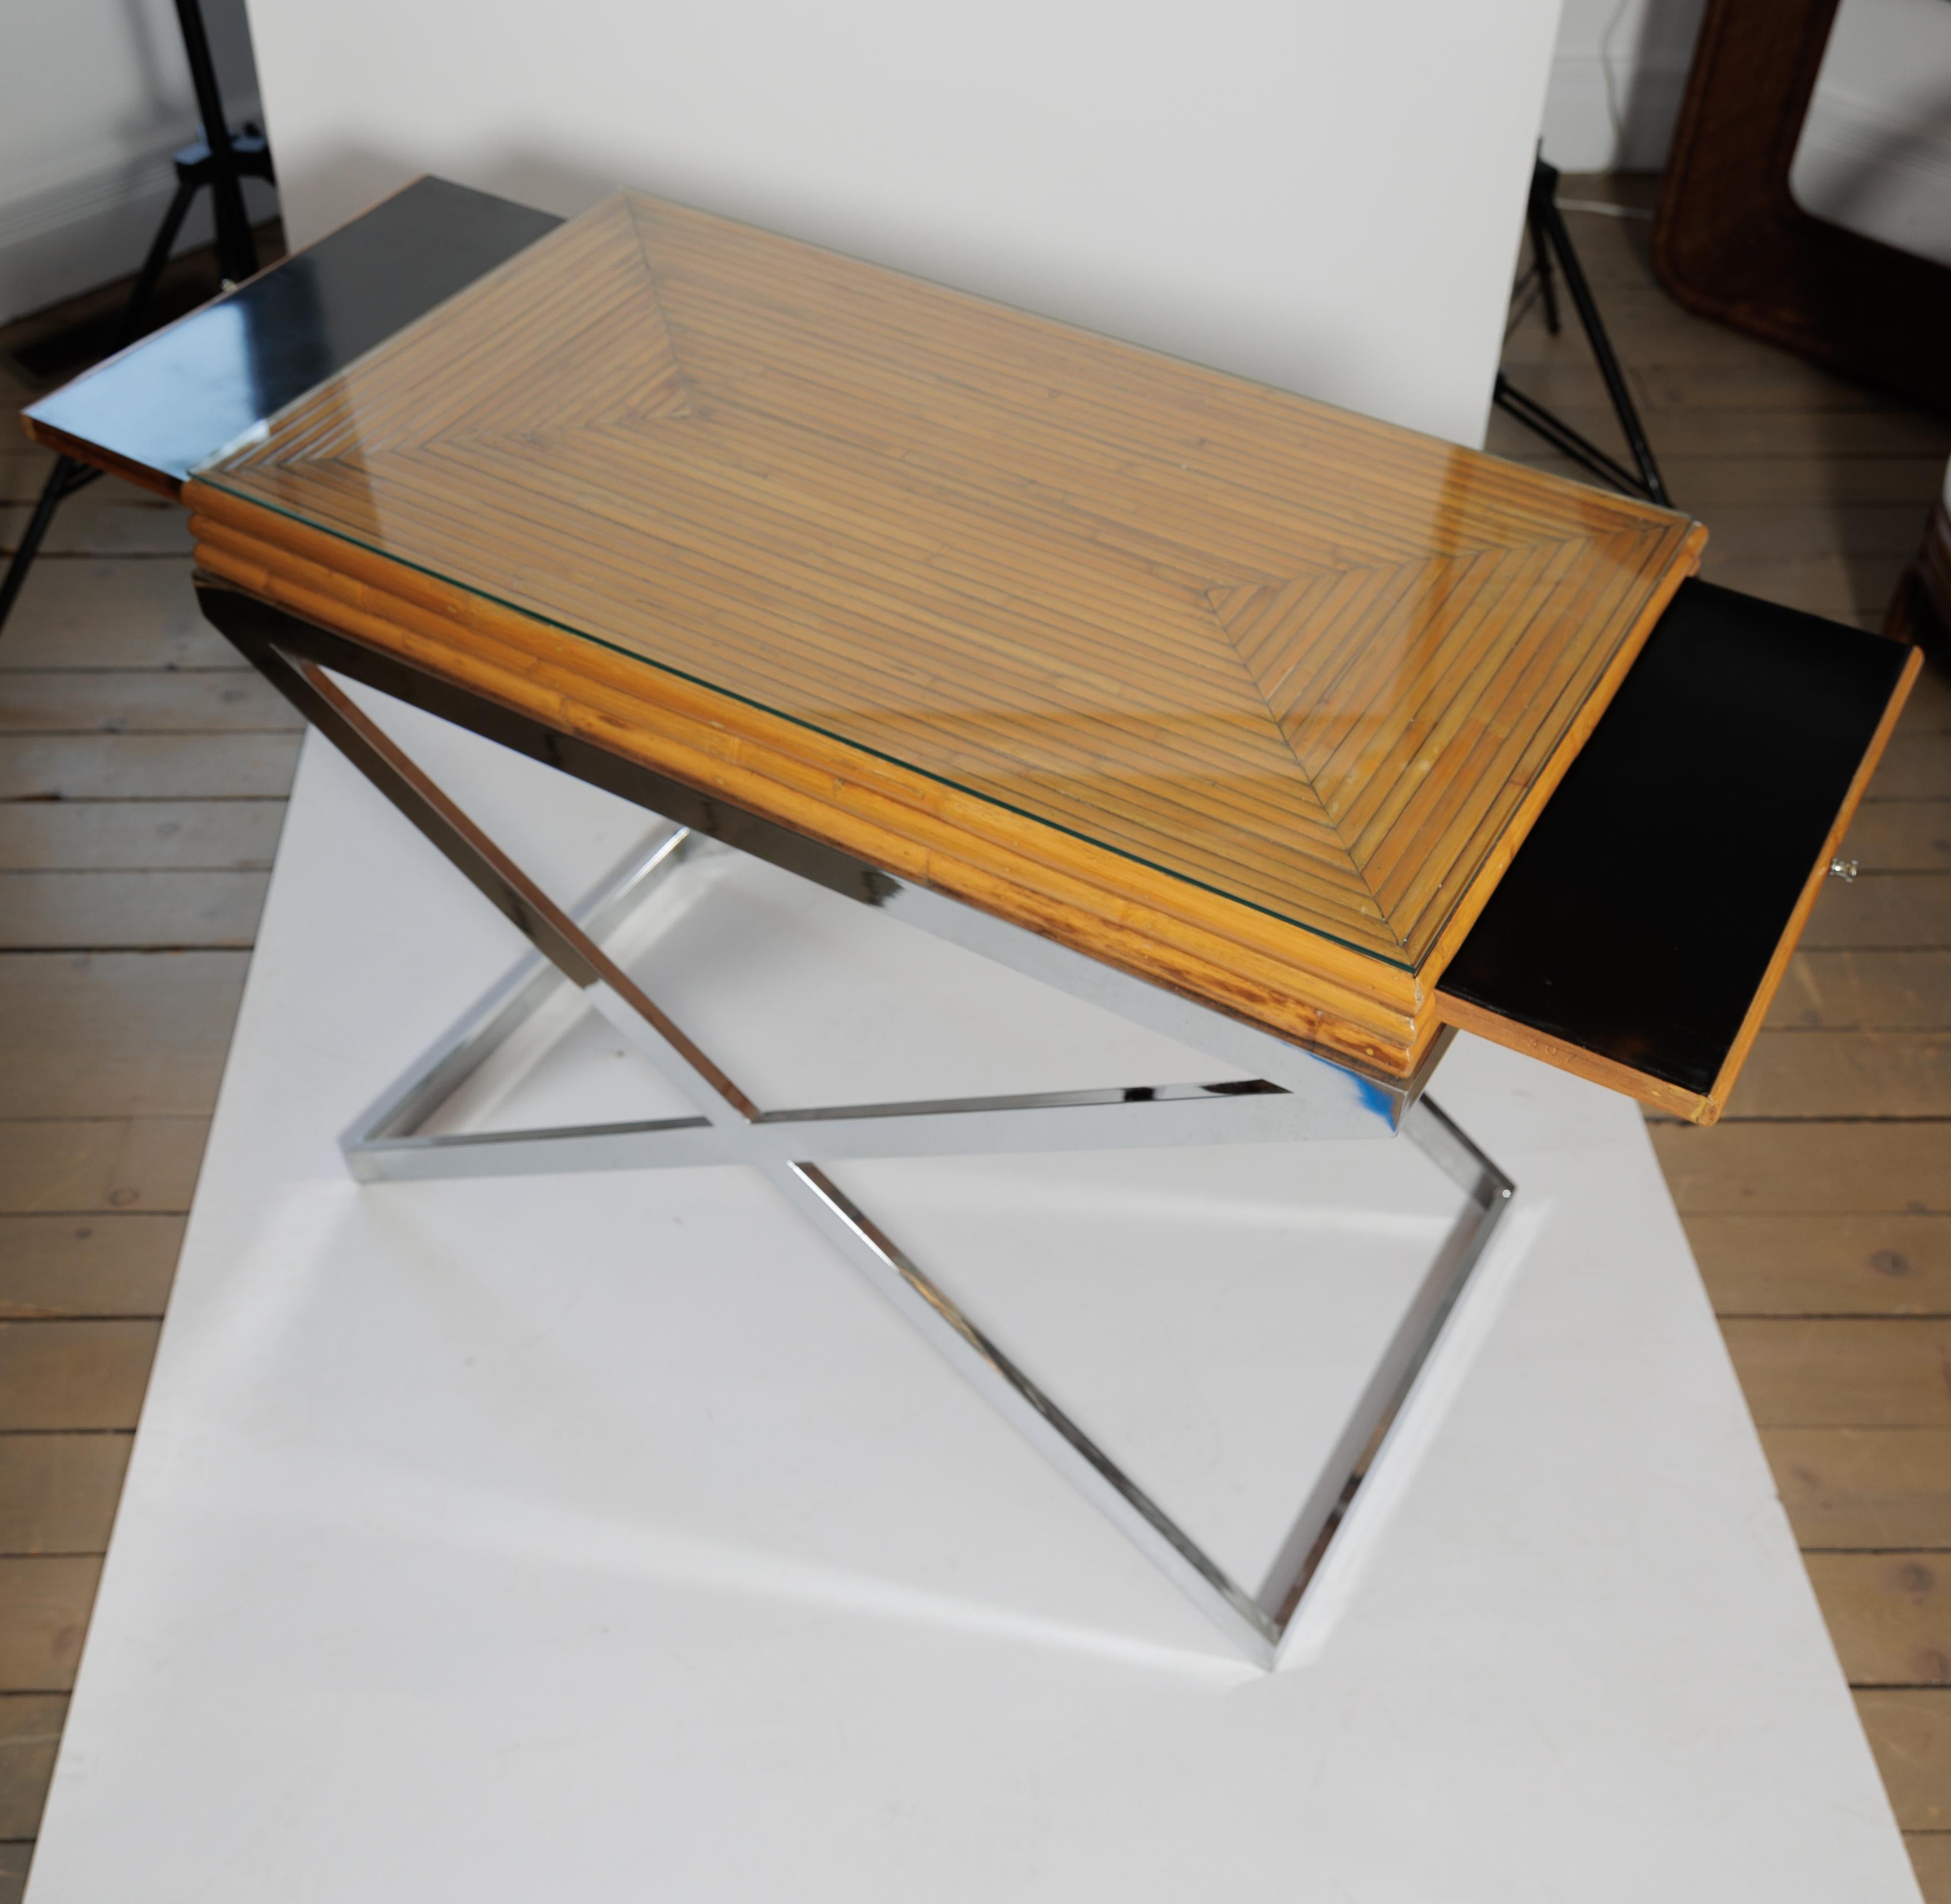 20th Century Bamboo Table with Chrome Base & Two Extending Leaves (15